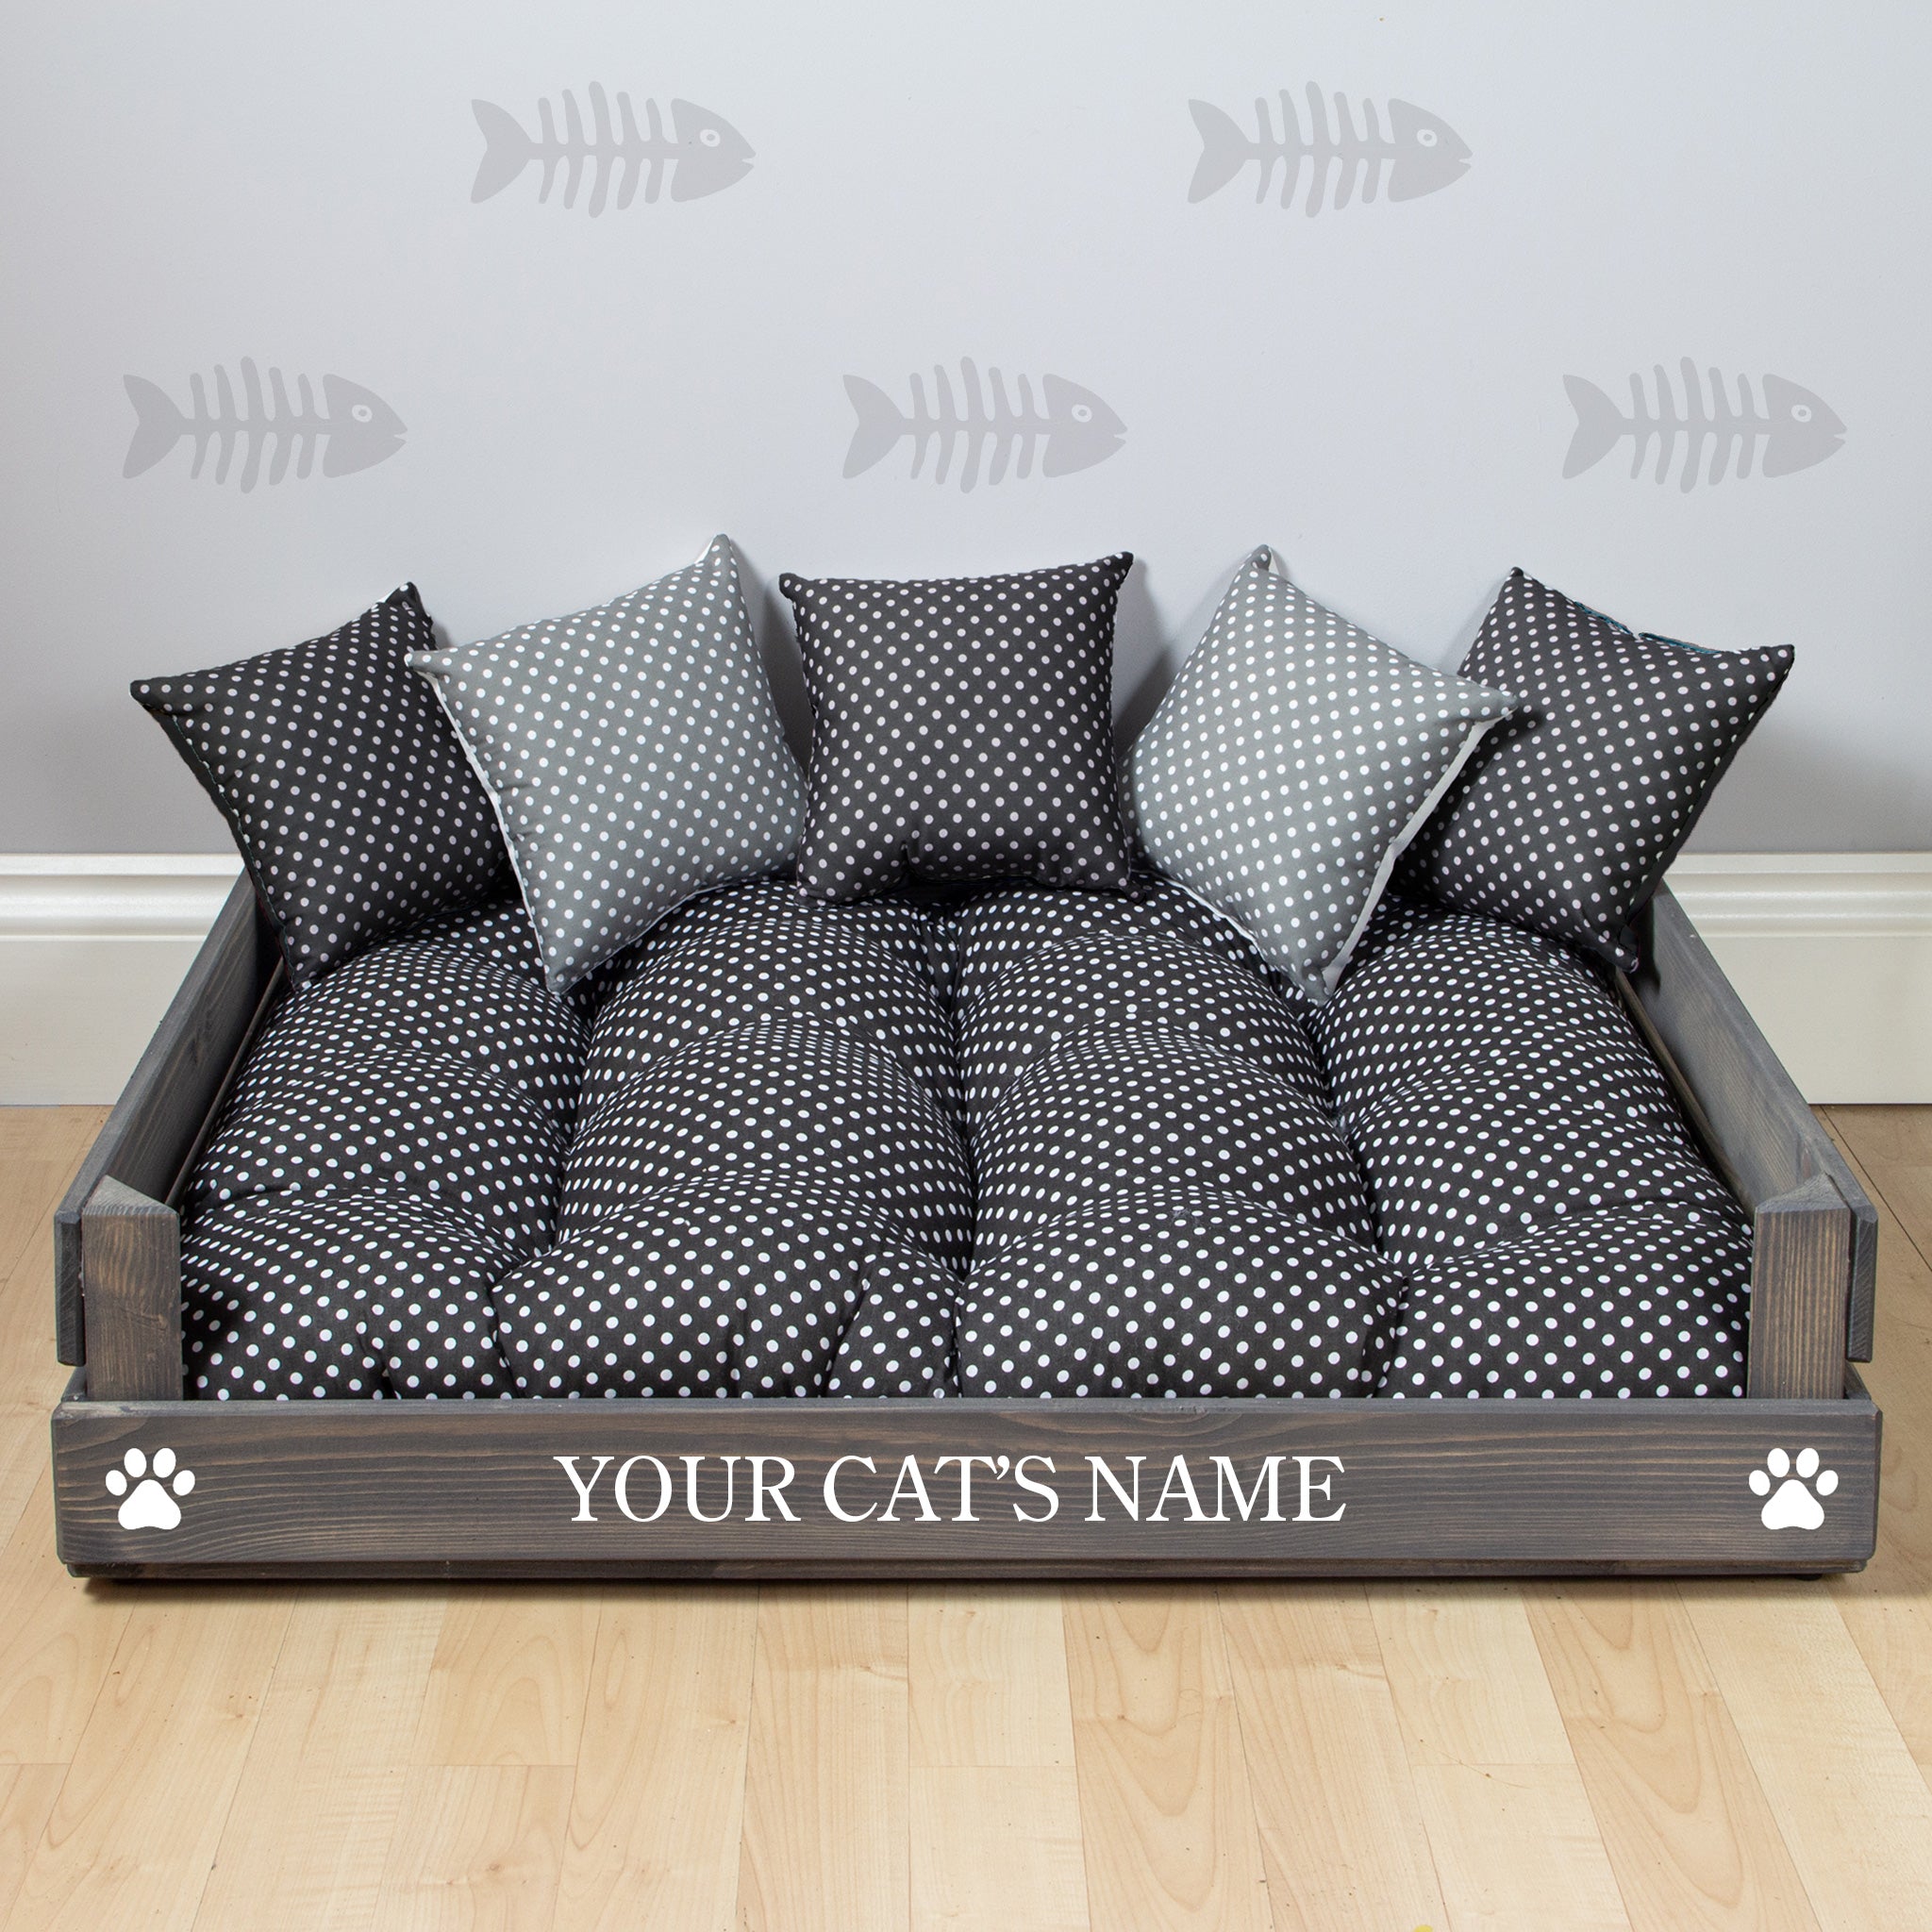 Wooden Personalised Cat Bed - Two Cats (59 x 76cm) - Ash Grey & Black Polka Dot